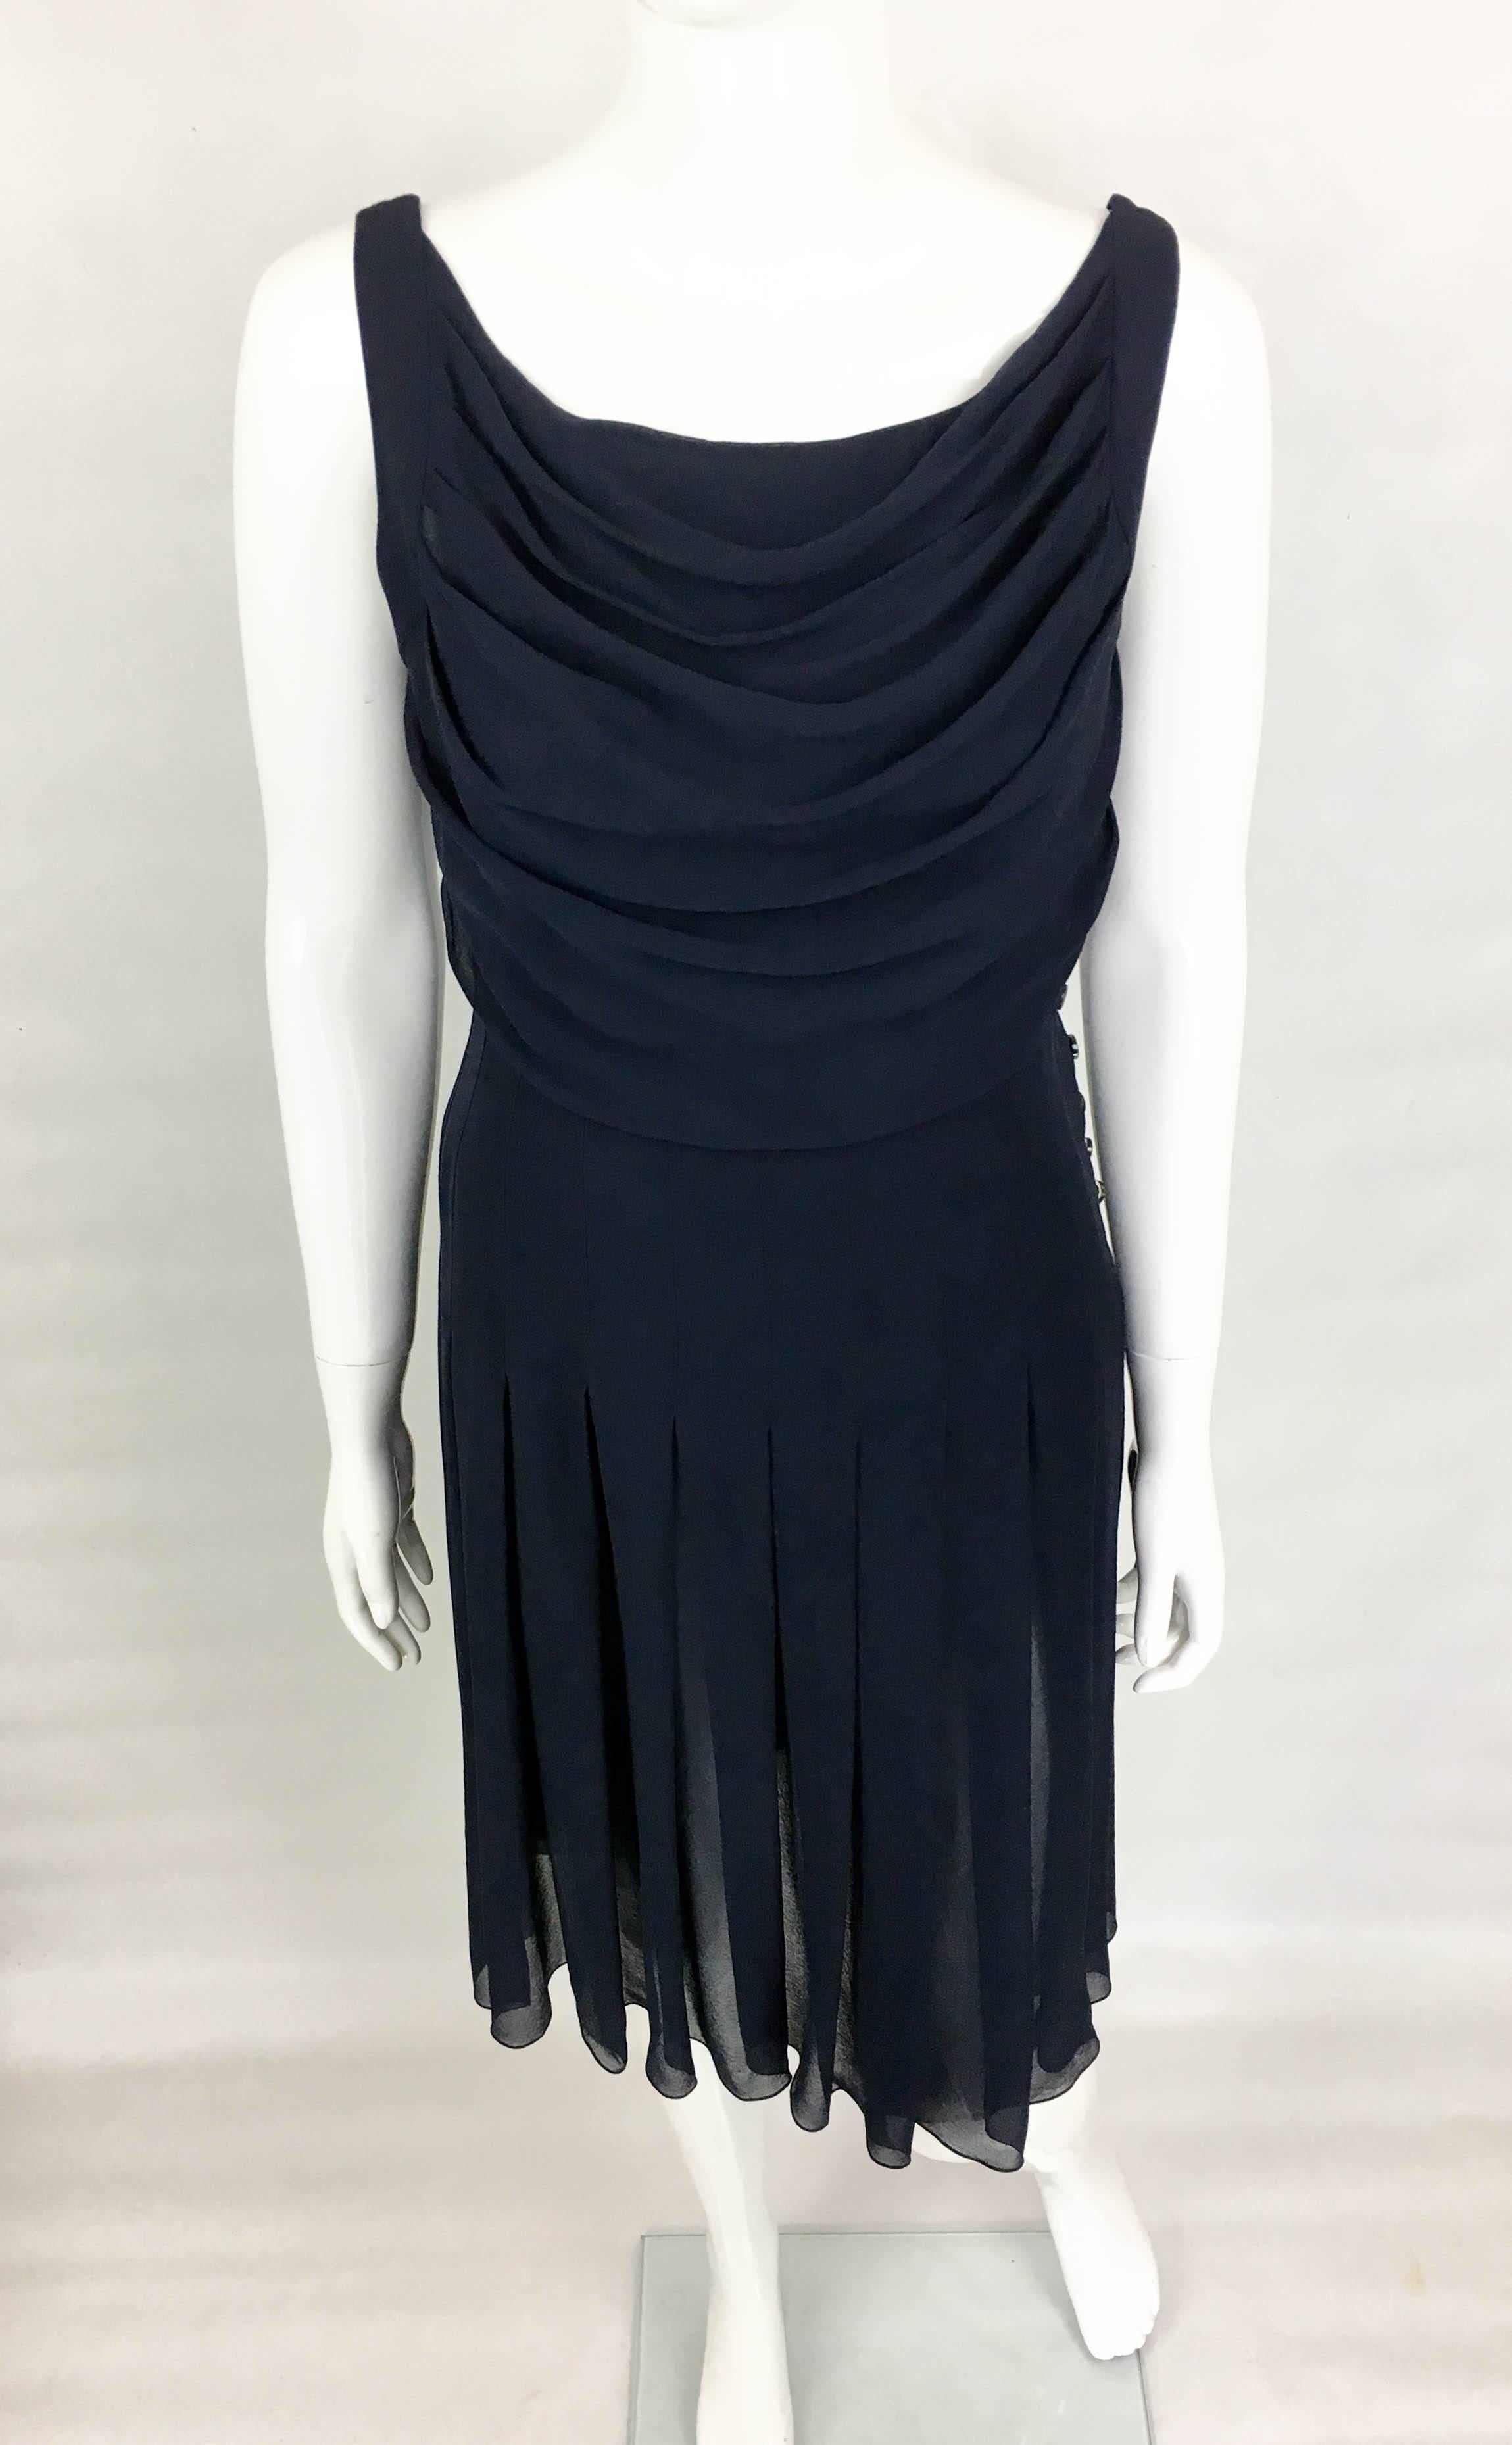 Chanel Midnight Blue Silk Chiffon Draped and Pleated Dress, Circa 2000 In Excellent Condition For Sale In London, Chelsea